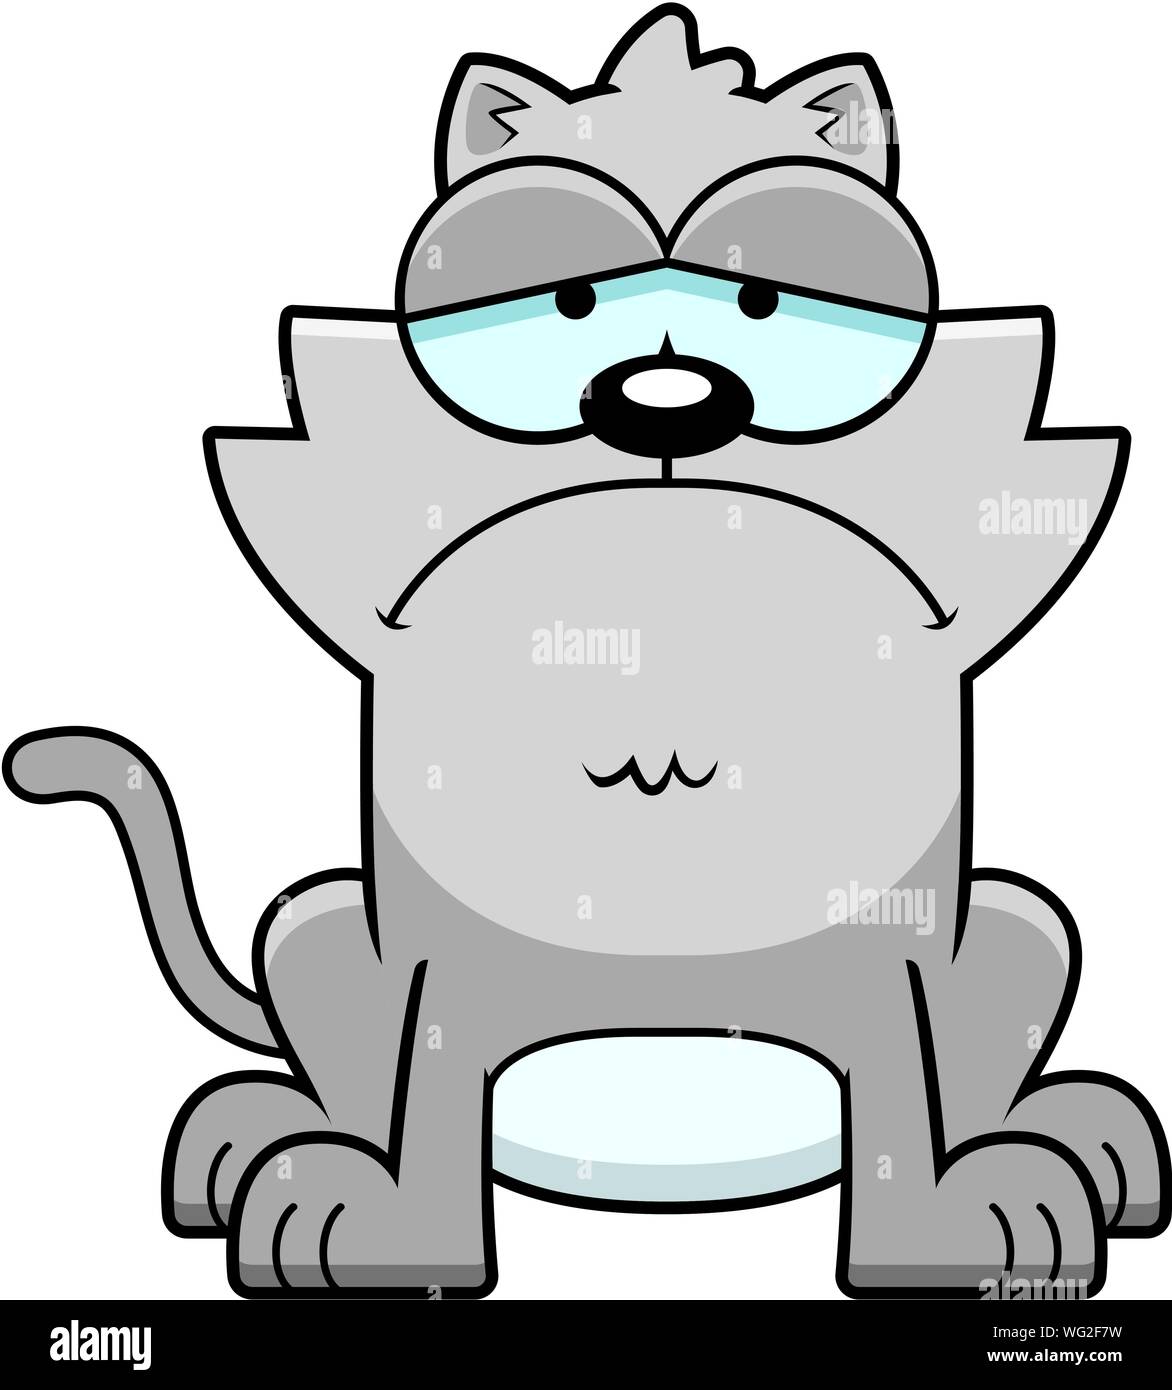 A cartoon illustration of a cat looking depressed. Stock Vector